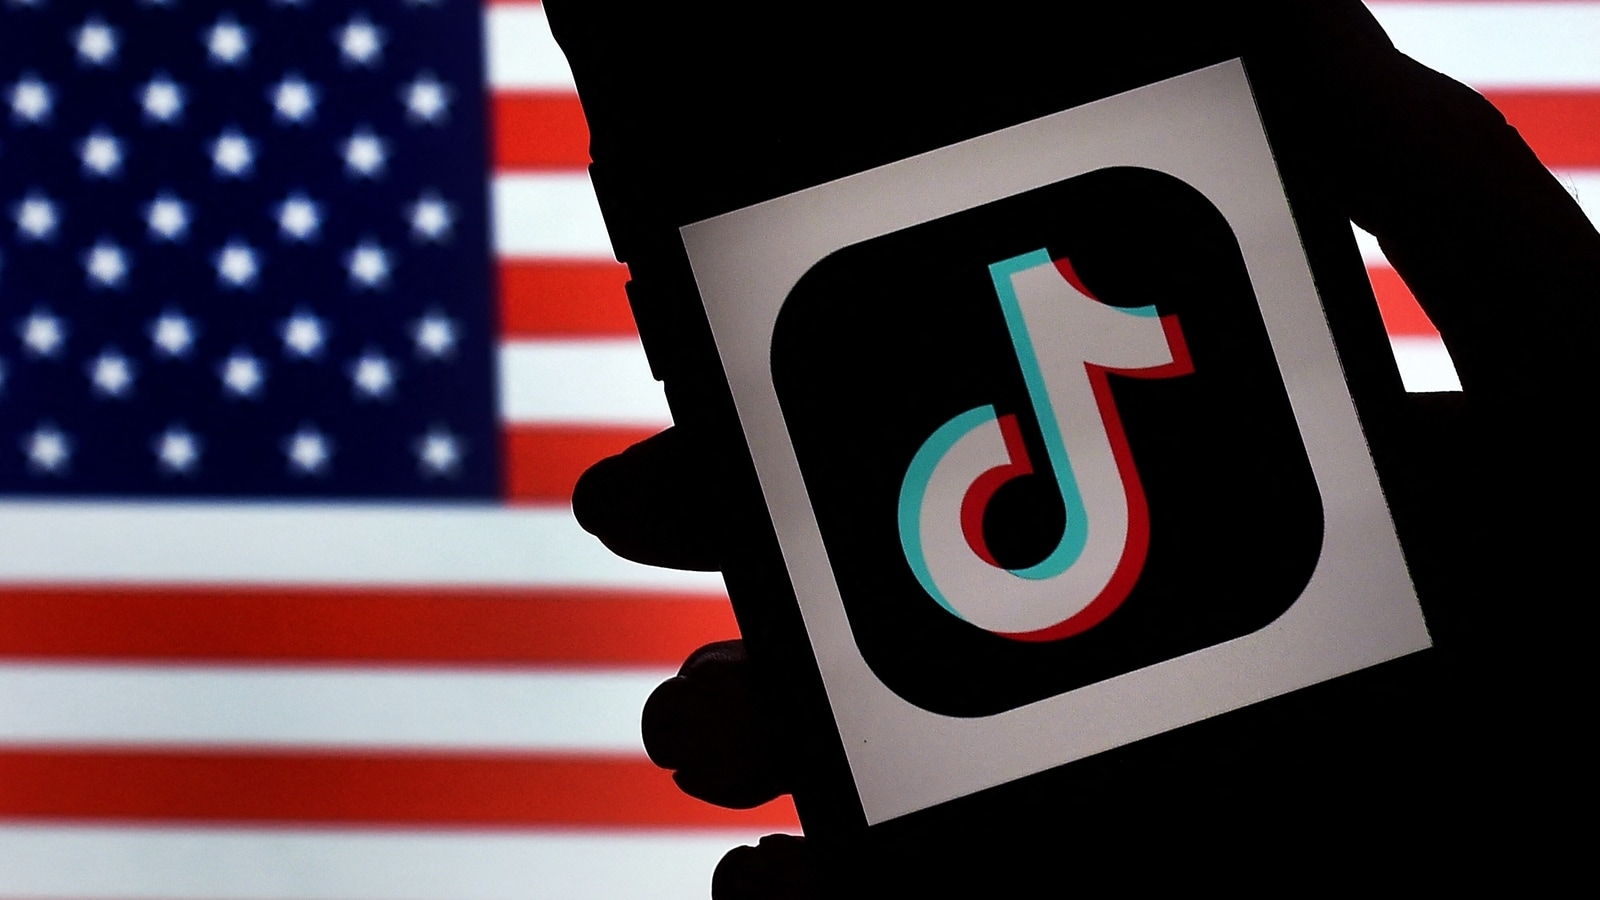 A group representing TikTok, Meta and X sues Ohio over new law limiting kids' use of social media